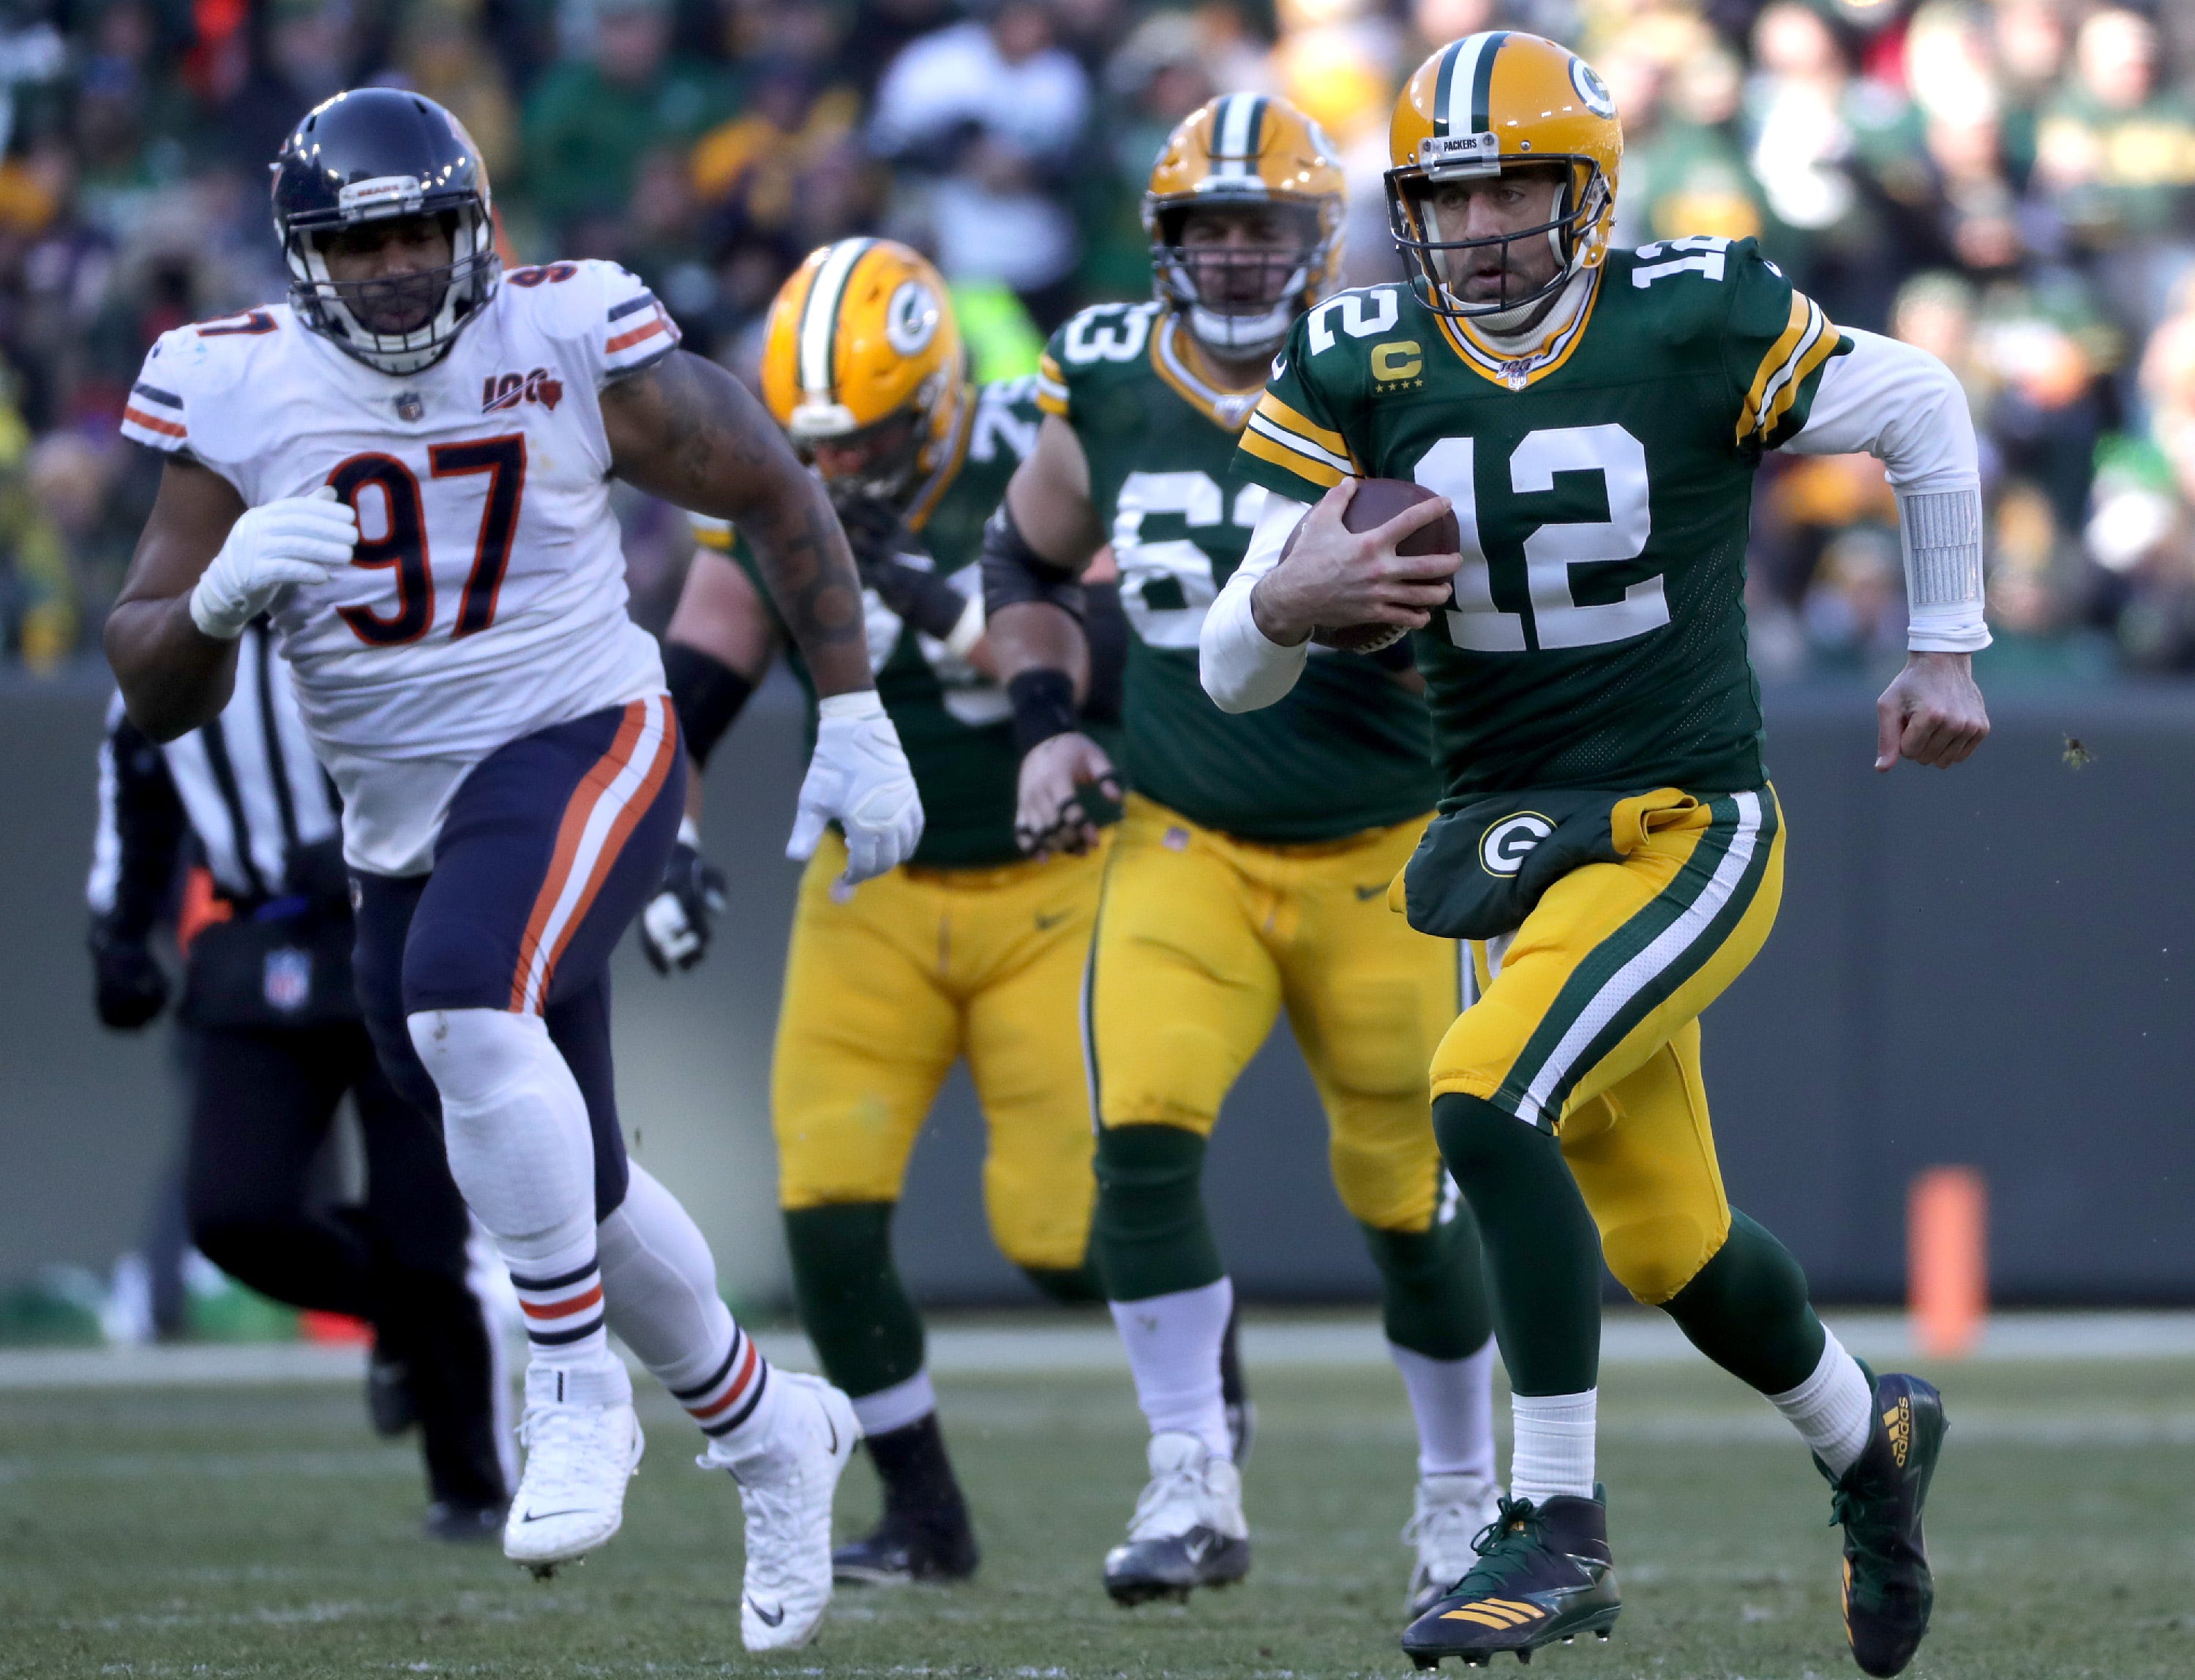 Green Bay Packers quarterback Aaron Rodgers (12) scrammbles on the first drive of the third quarter against the Chicago Bears during their football game on Sunday, December 15, 2019, at Lambeau Field in Green Bay, Wis.